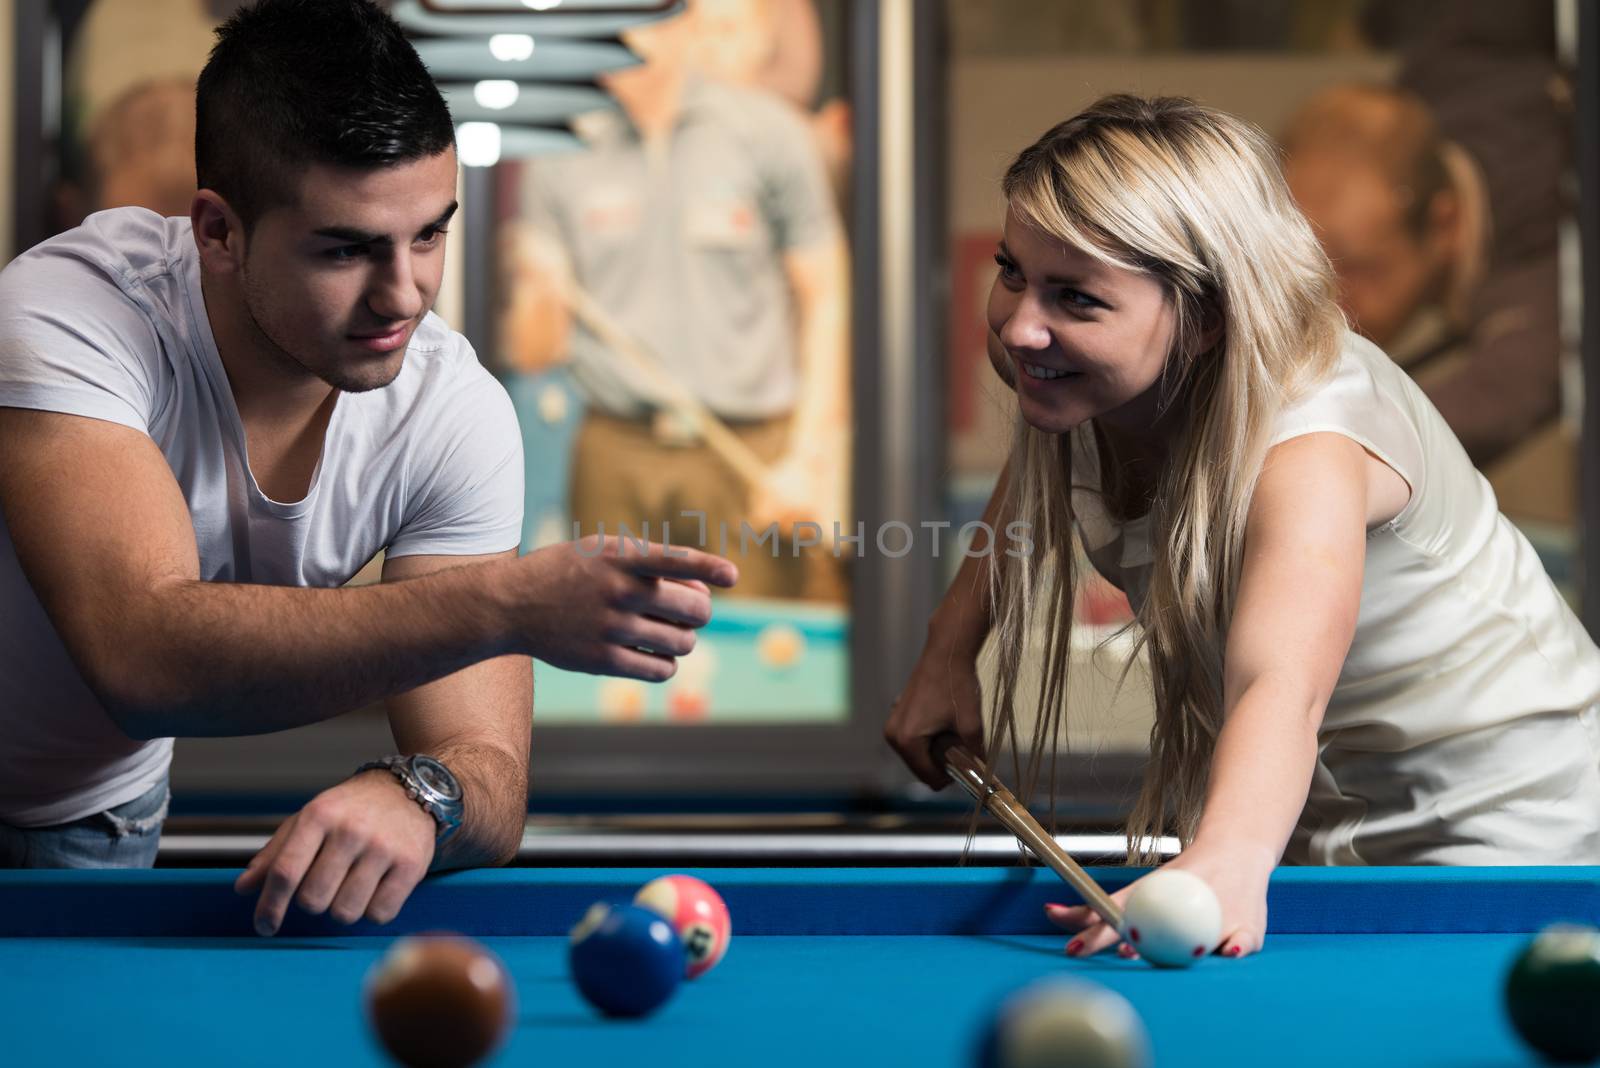 Man Showing His Girlfriend Where To Hit The Ball by JalePhoto